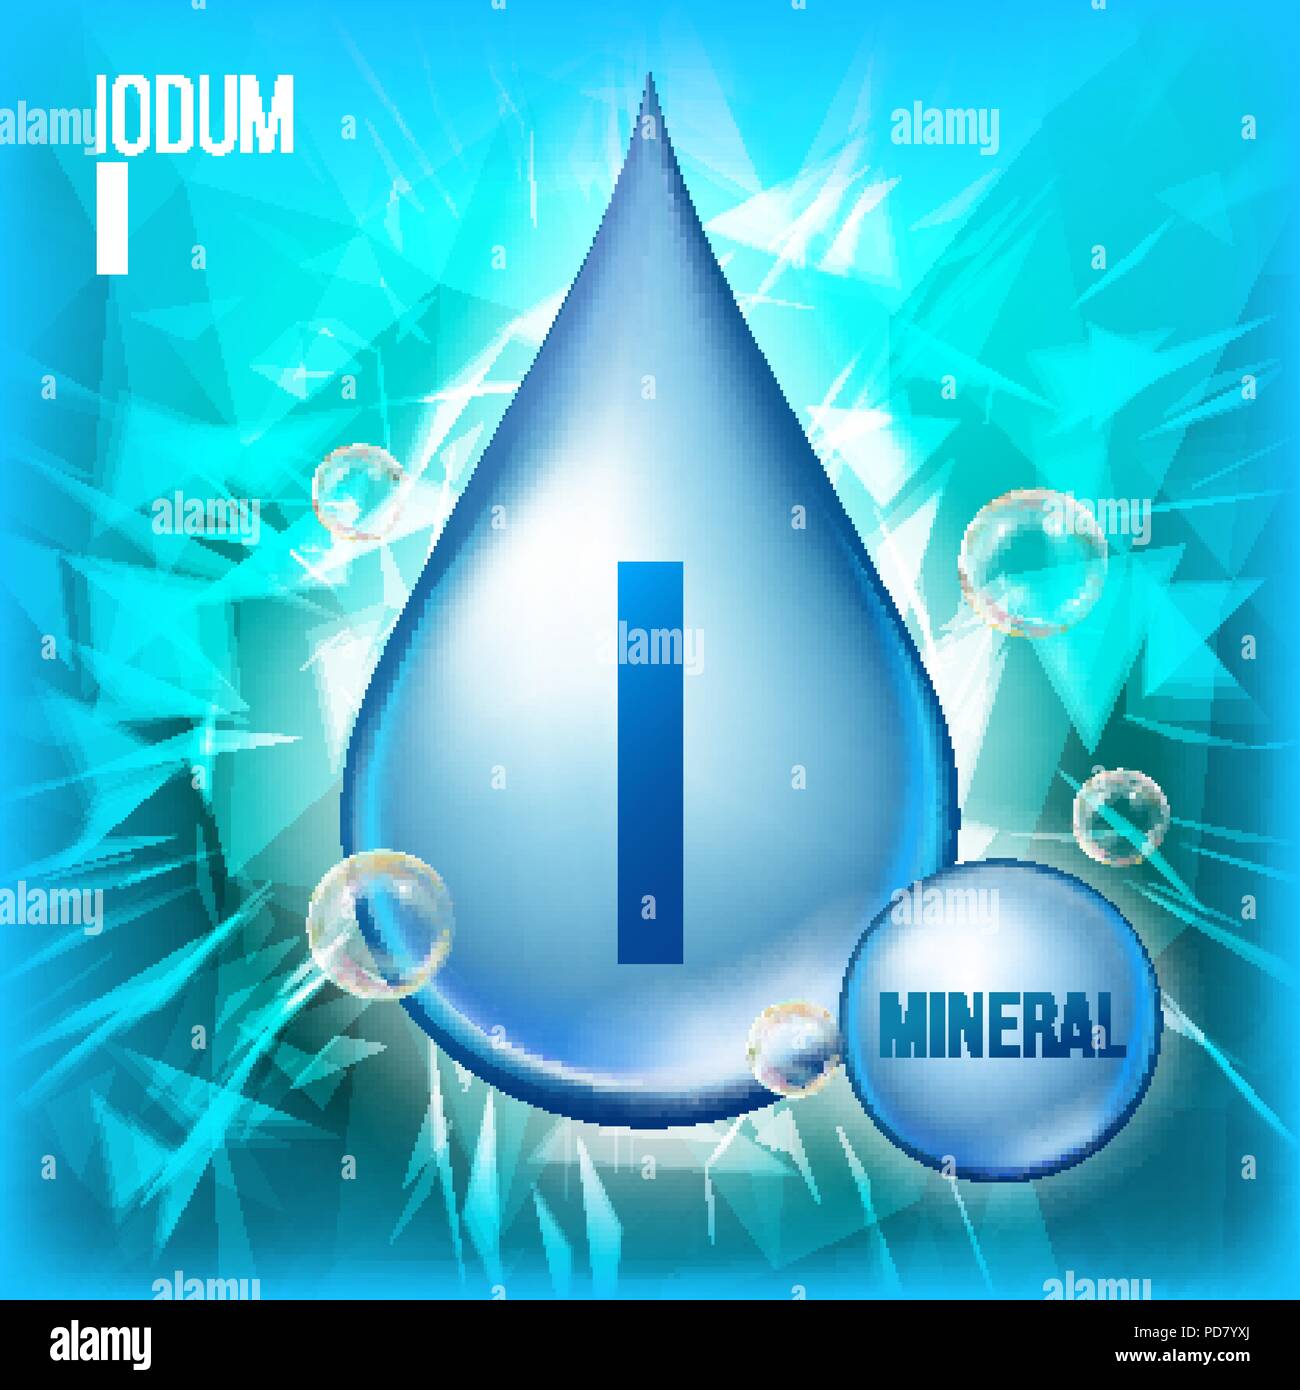 I Iodum Vector. Mineral Blue Drop Icon. Vitamin Capsule Liquid Icon. Substance For Beauty, Cosmetic, Heath Promo Ads Design. 3D Mineral Complex With Chemical Formula. Illustration Stock Vector